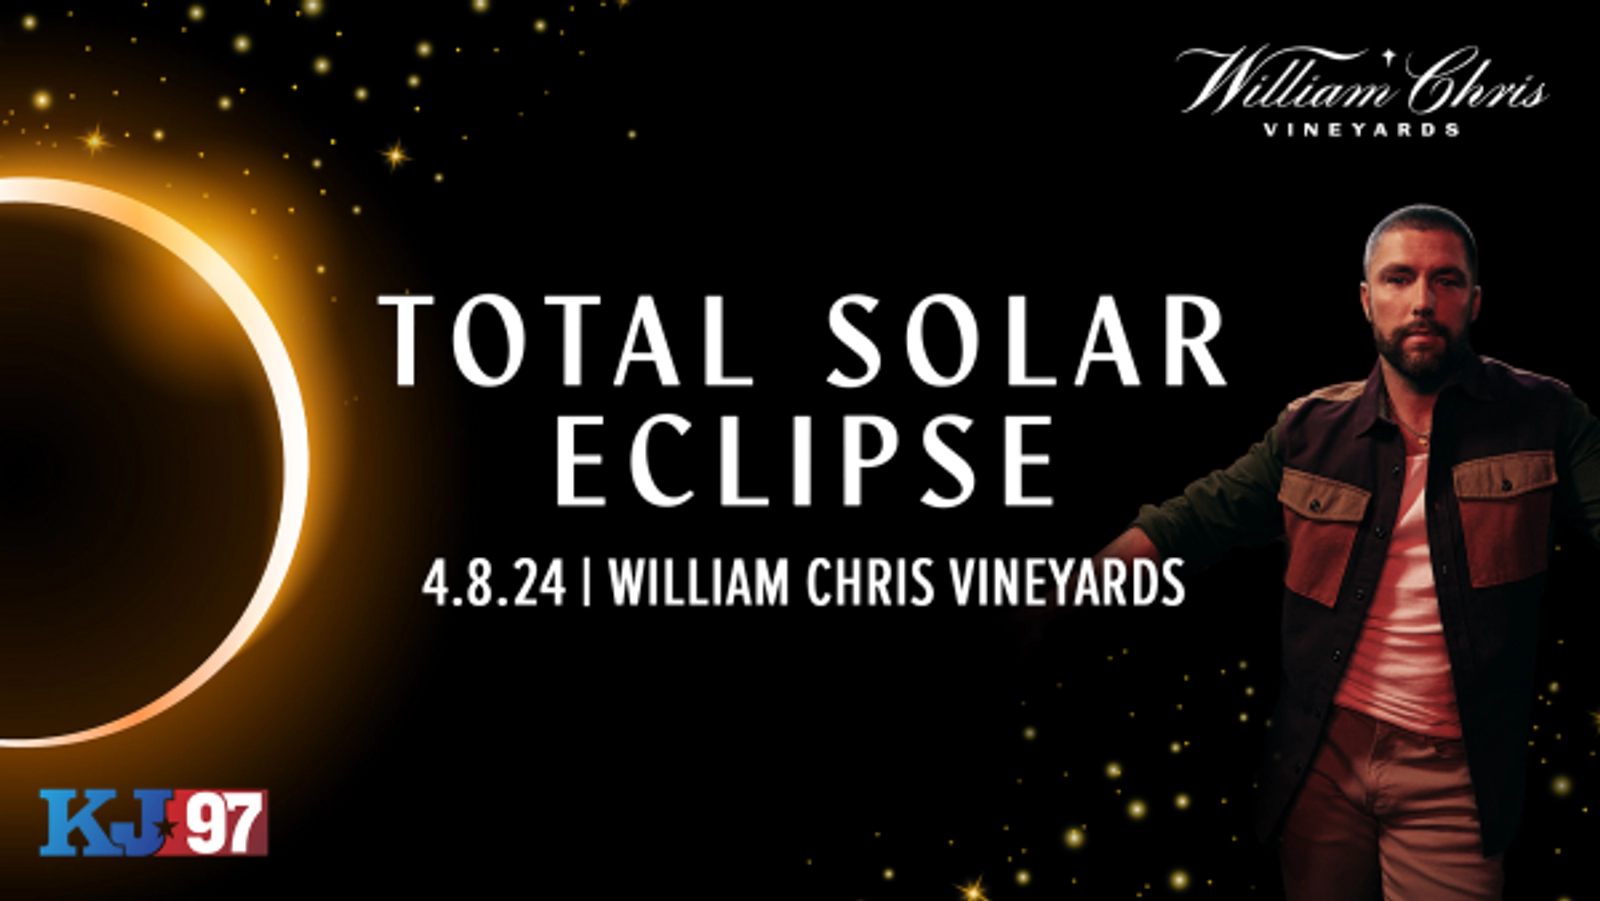 PURCHASE TICKETS TO SEE THE 2024 ECLIPSE AT WILLIAM CHRIS VINEYARDS